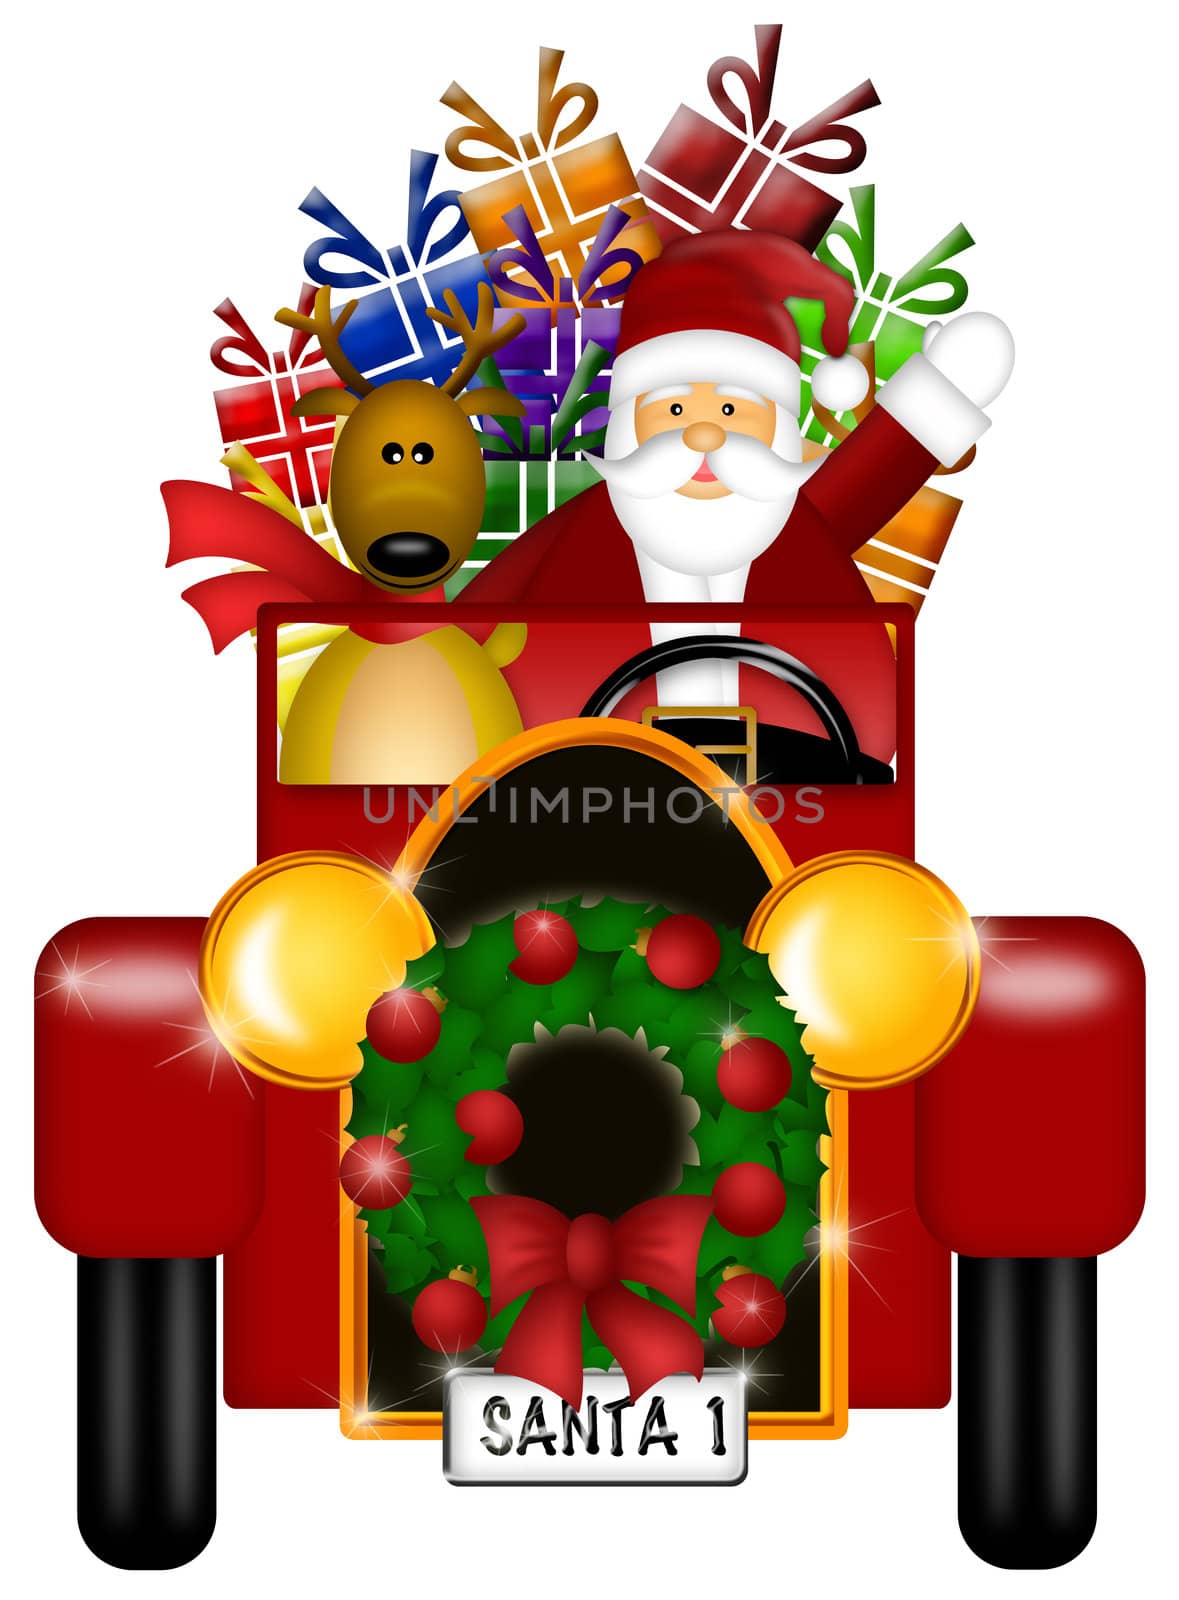 Santa Claus and Reindeer in Winter Snow Scene Driving in Vintage Red Car Isolated on White Background Illustration